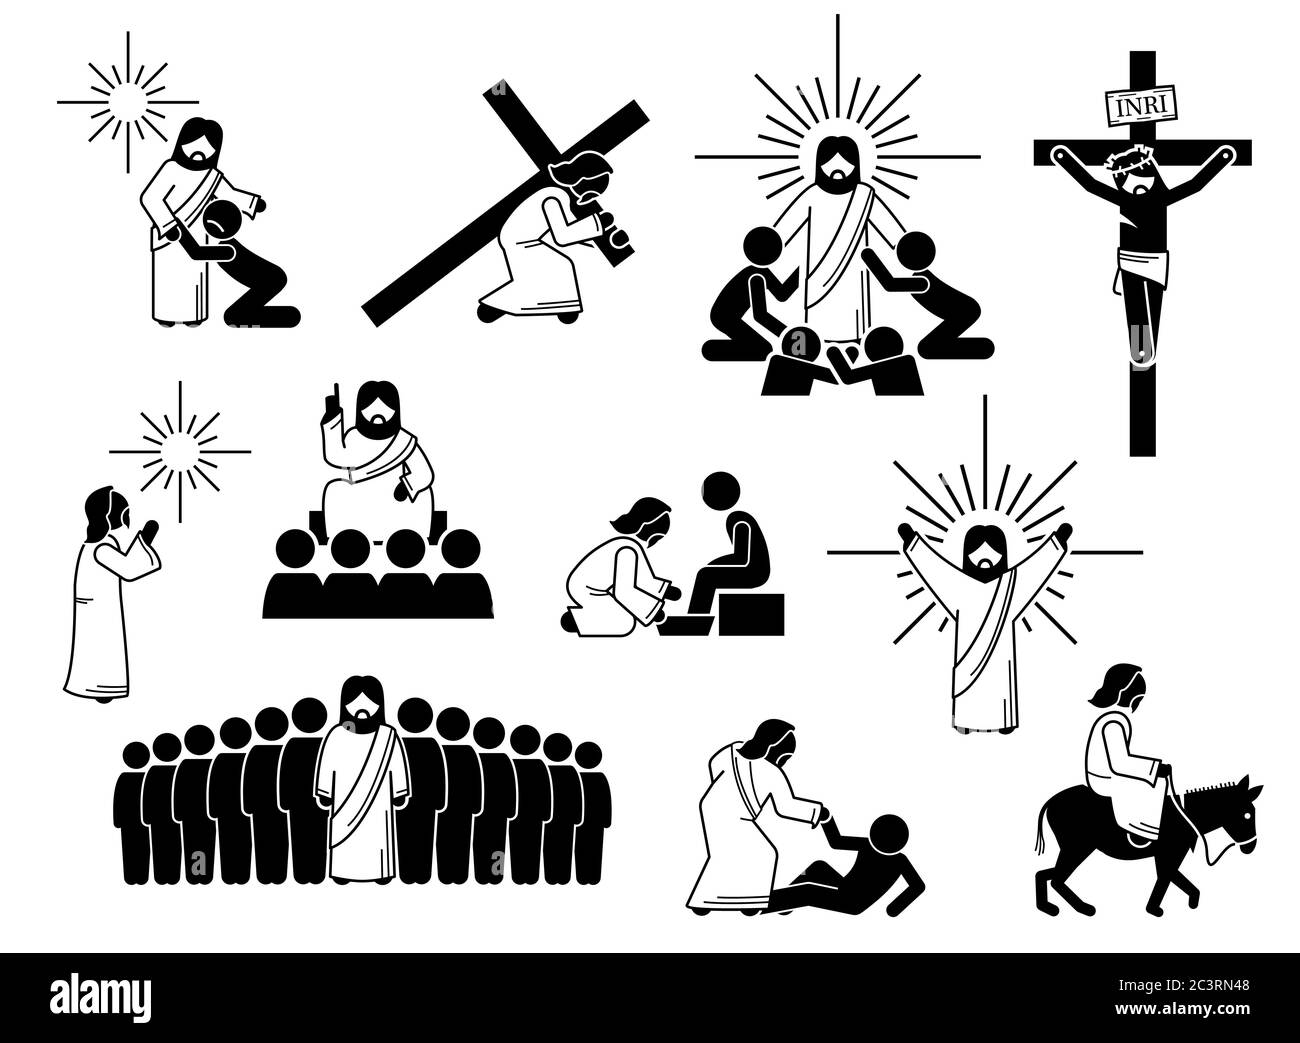 Jesus Christ stick figure, icons and pictogram. Illustrations of Jesus Christ with people, cross, crucifixion, praying, worship, sacrifice, teaching d Stock Vector